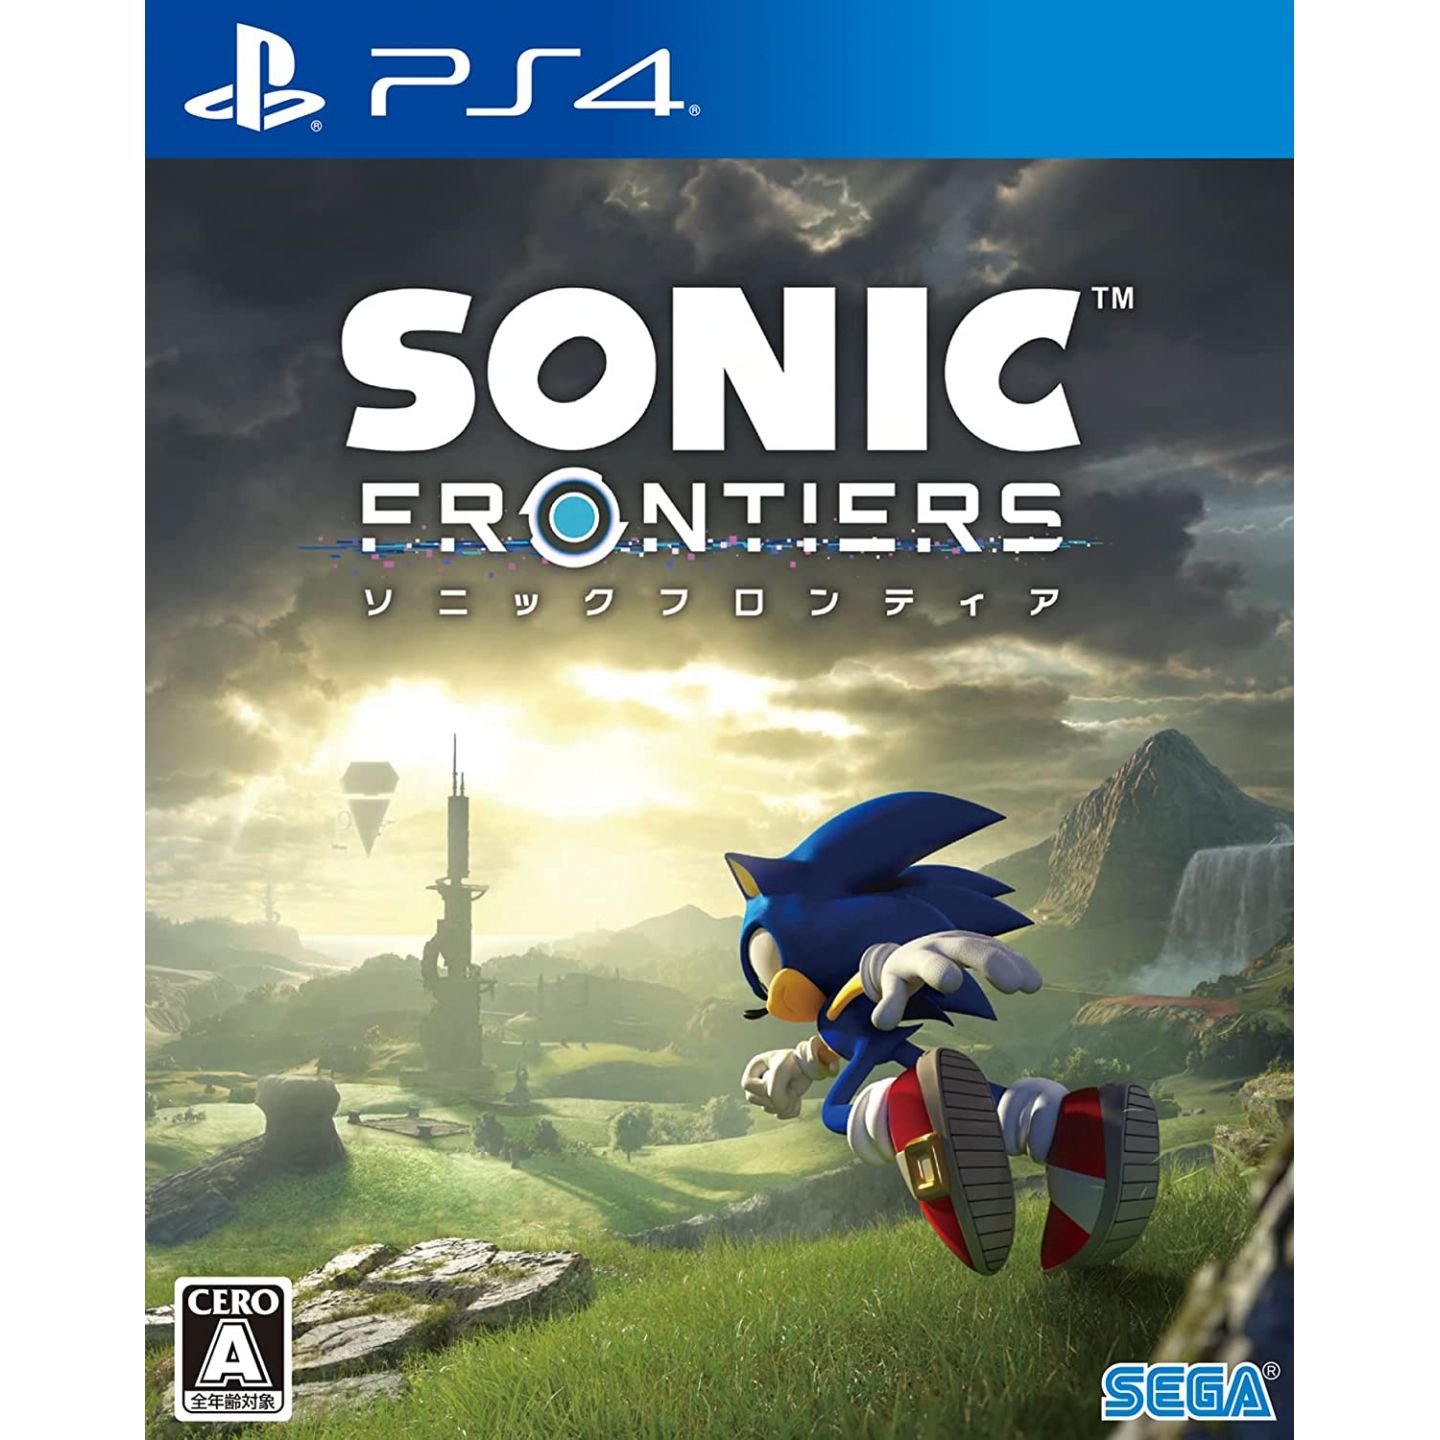 Sonic Frontiers Character Poster